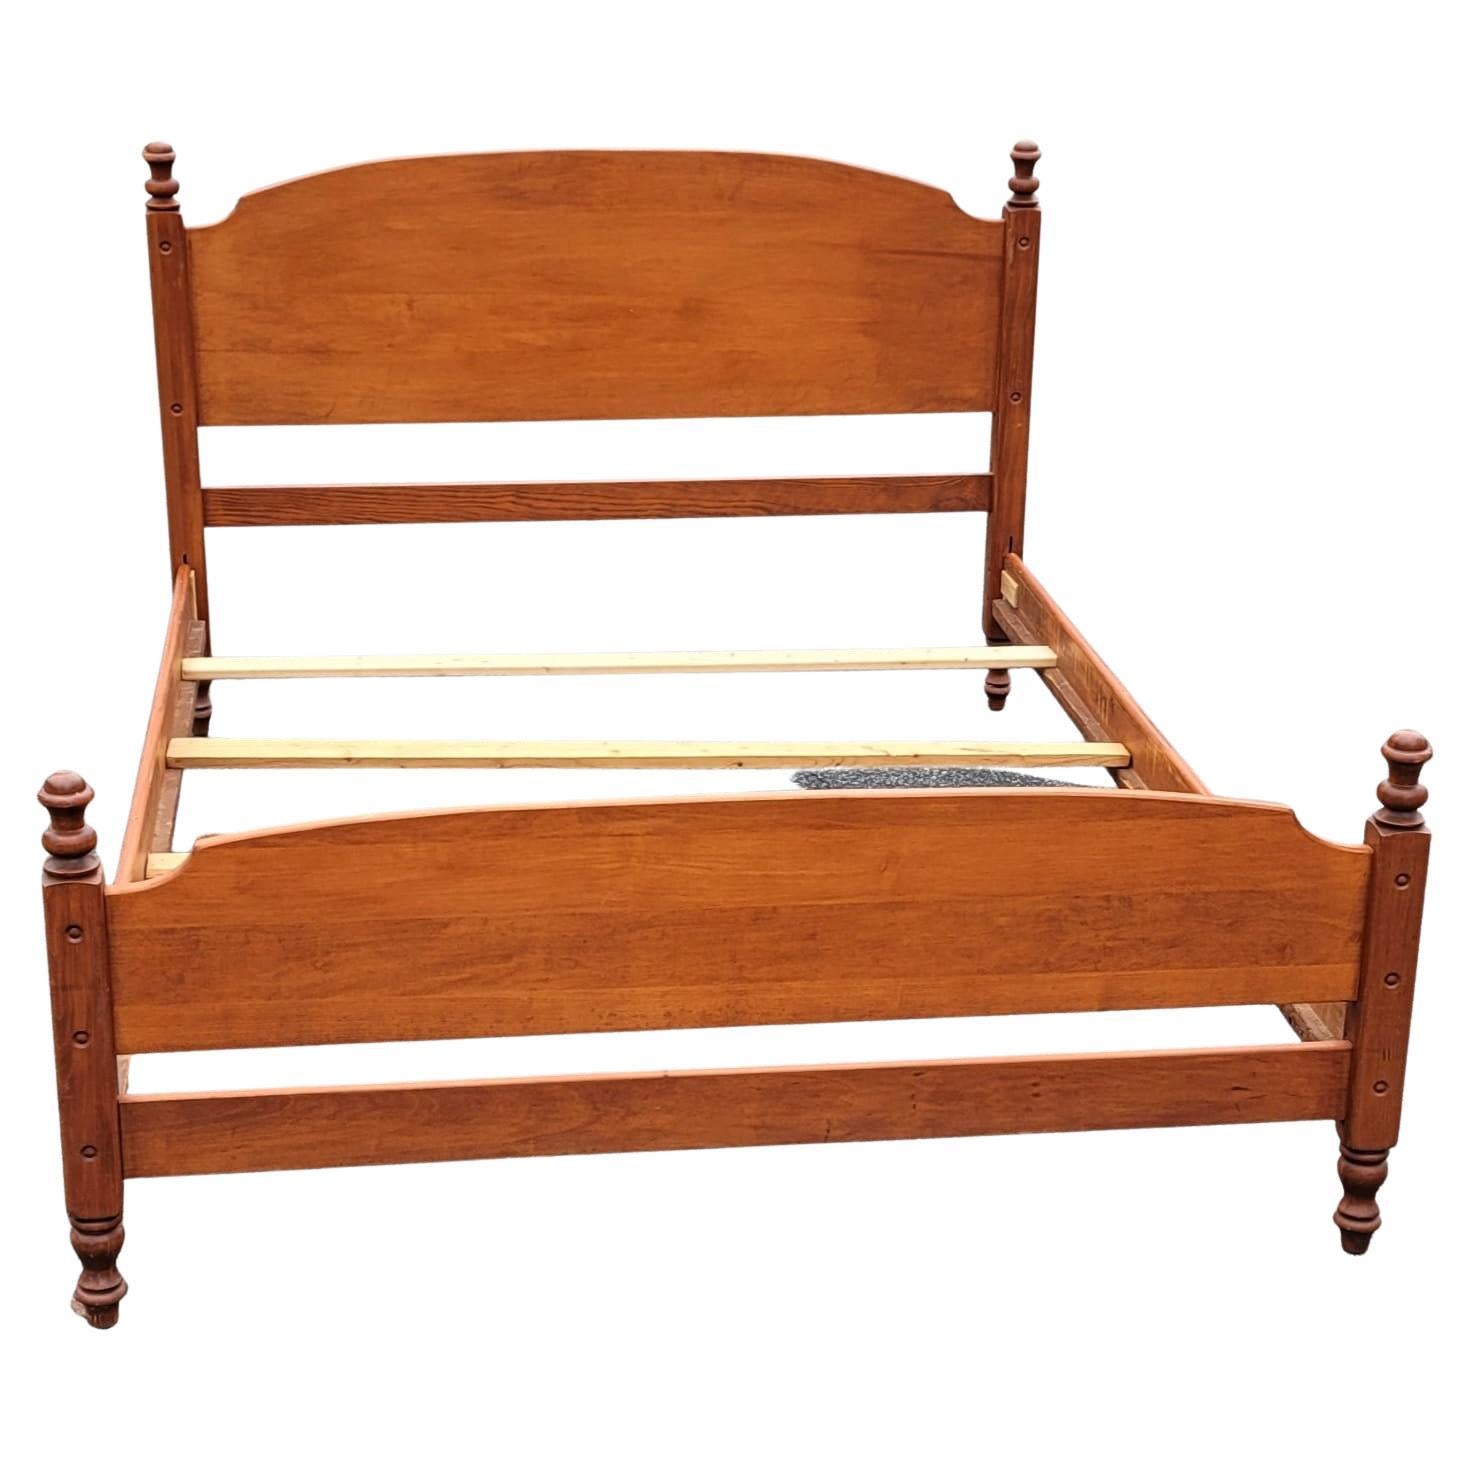 American Colonial American Classical Colonial Style Maple Full Size Bedstead